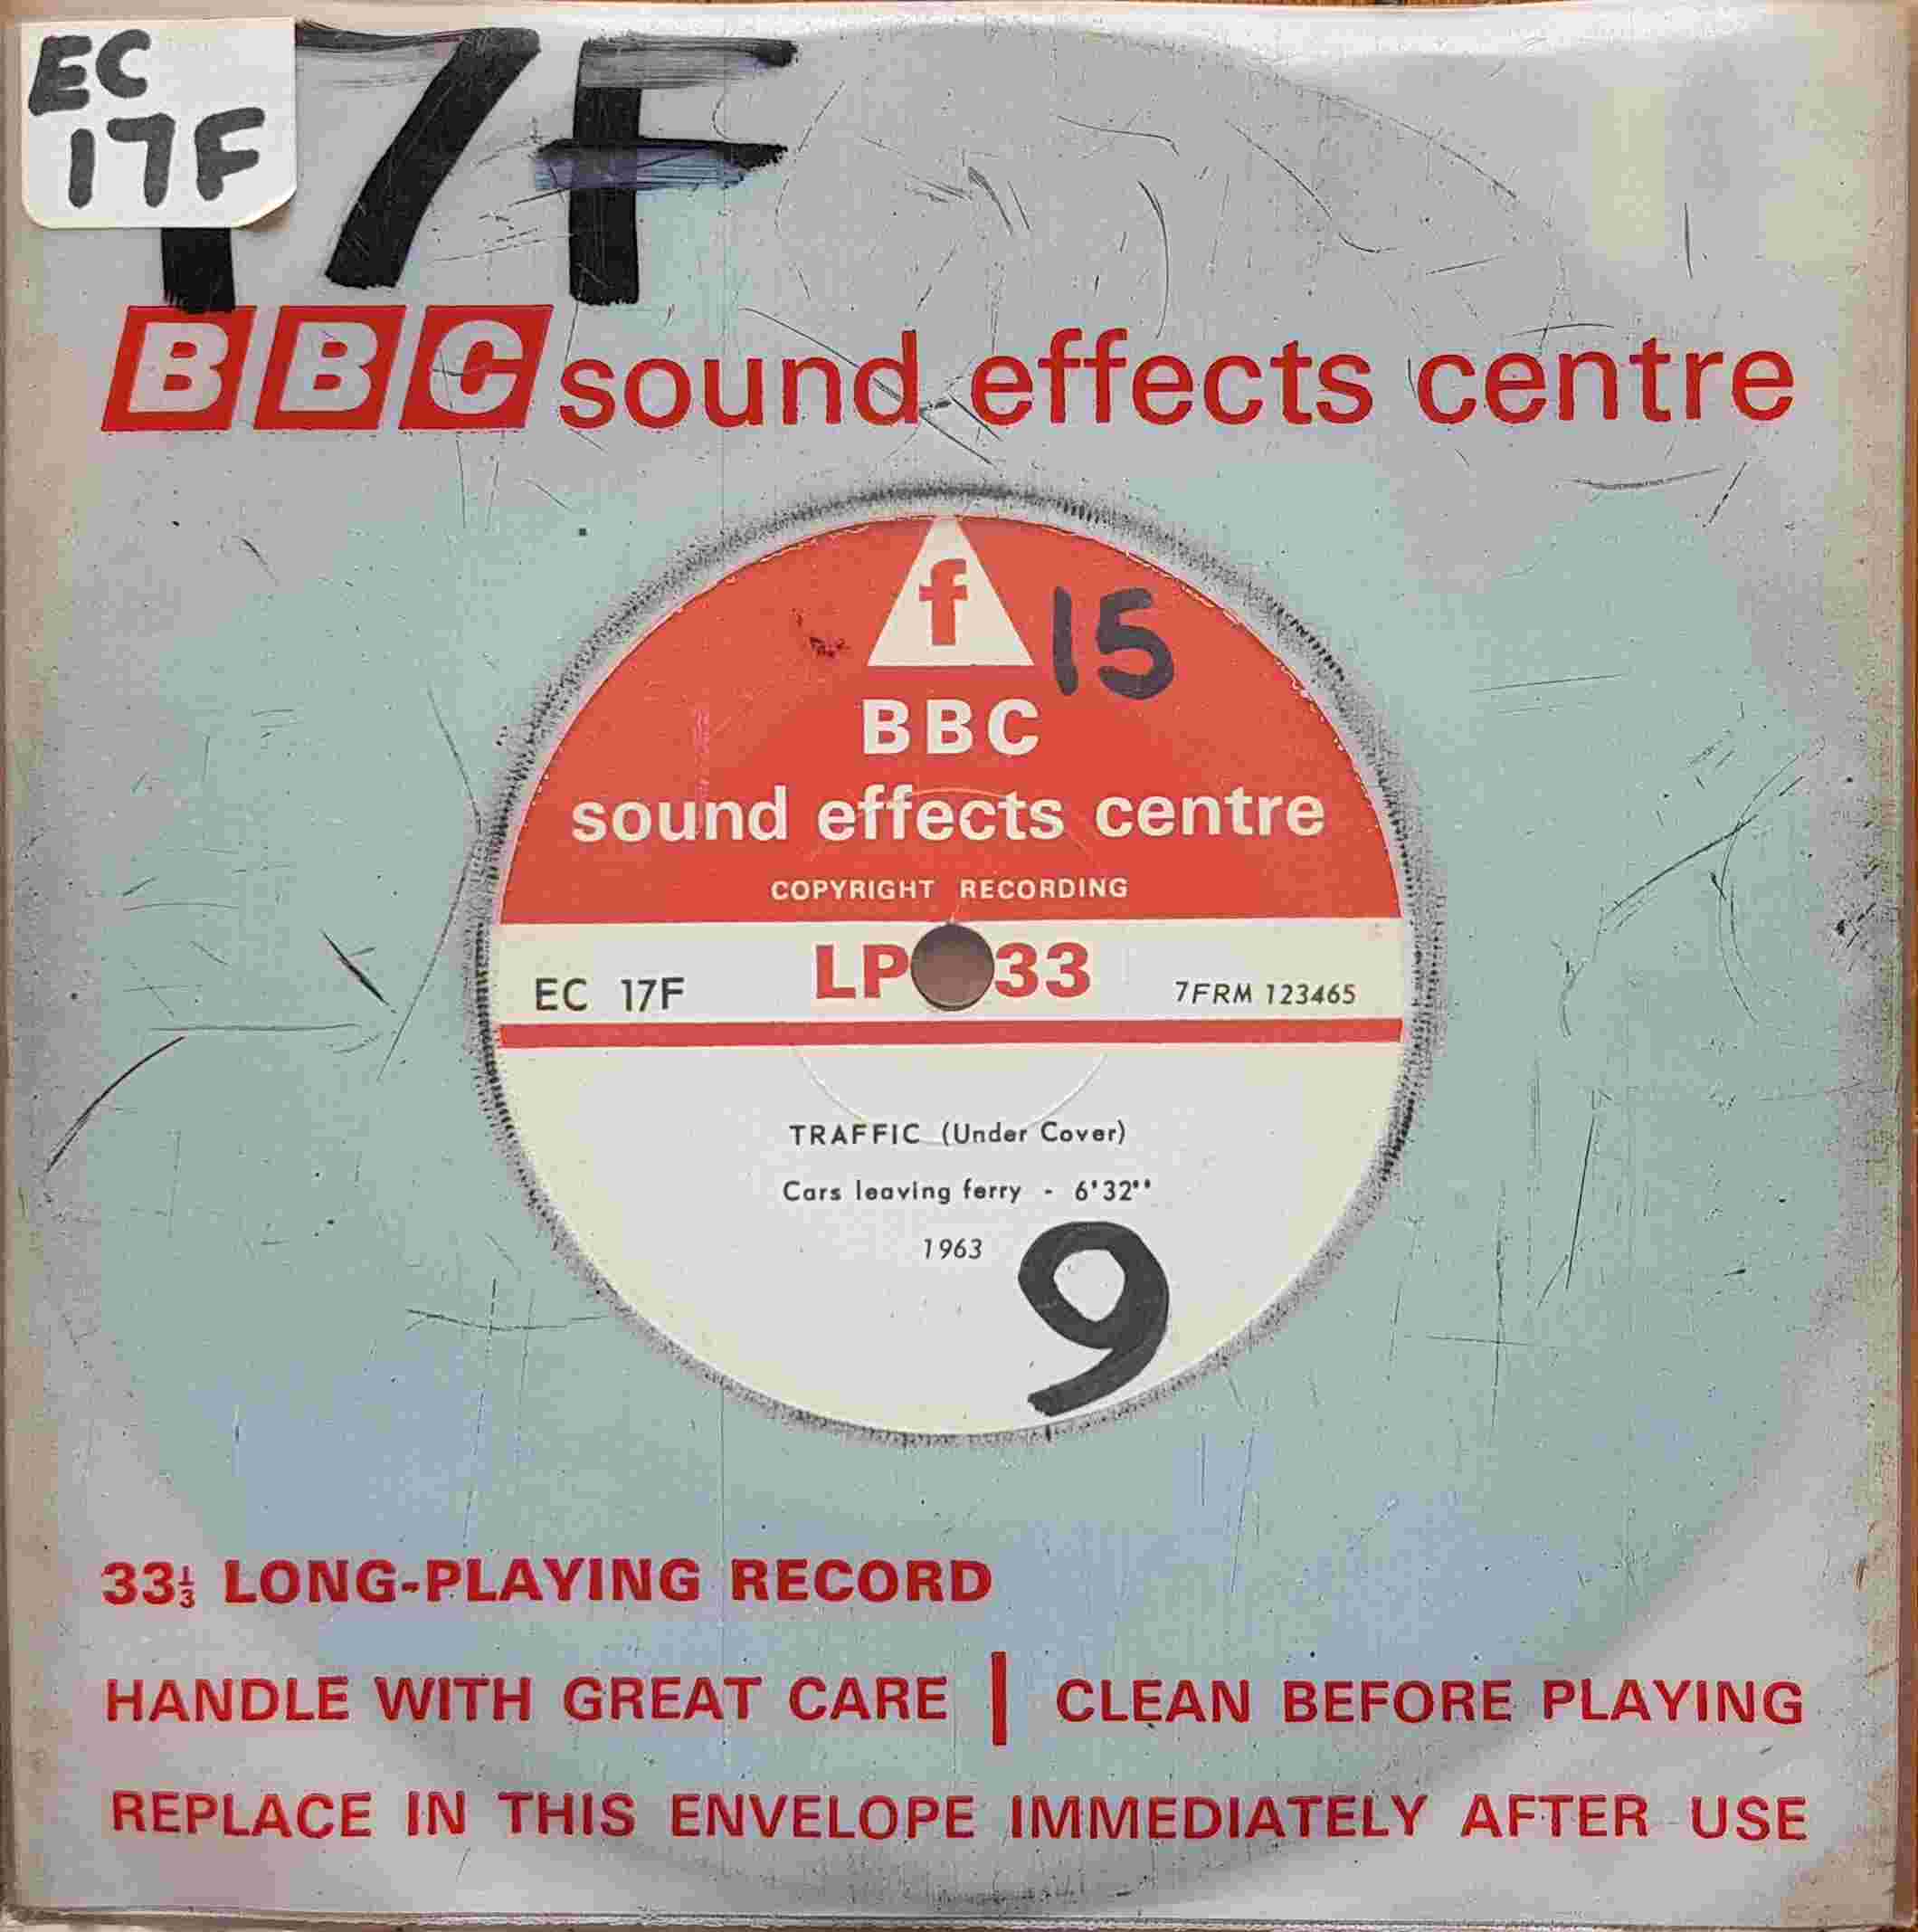 Picture of EC 17F Traffic (Under cover) / Hammersmith by artist Not registered from the BBC singles - Records and Tapes library